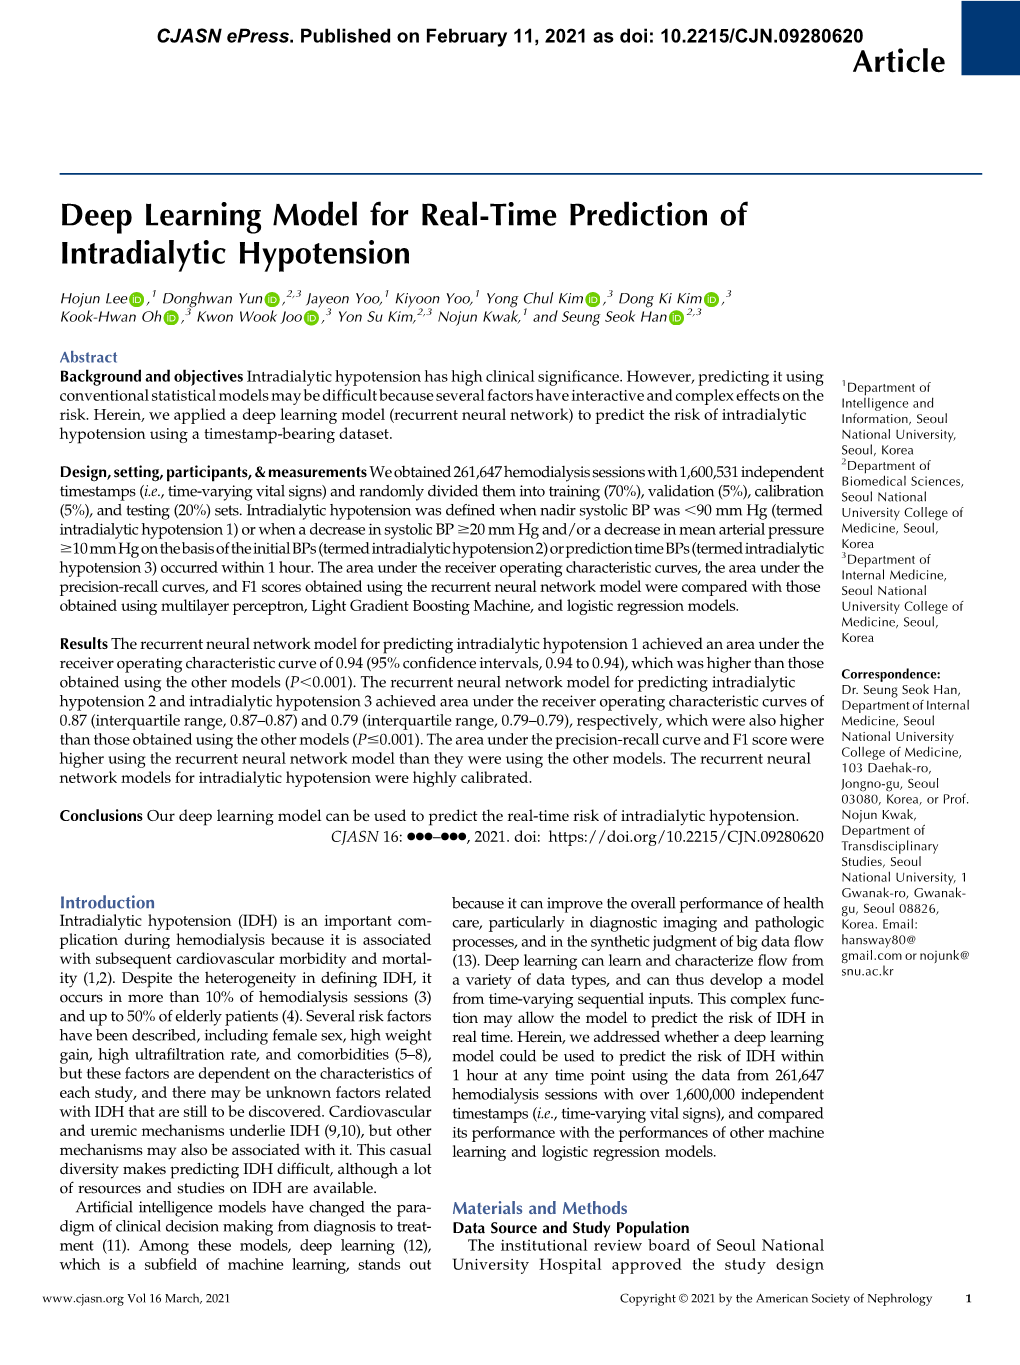 Article Deep Learning Model for Real-Time Prediction of Intradialytic